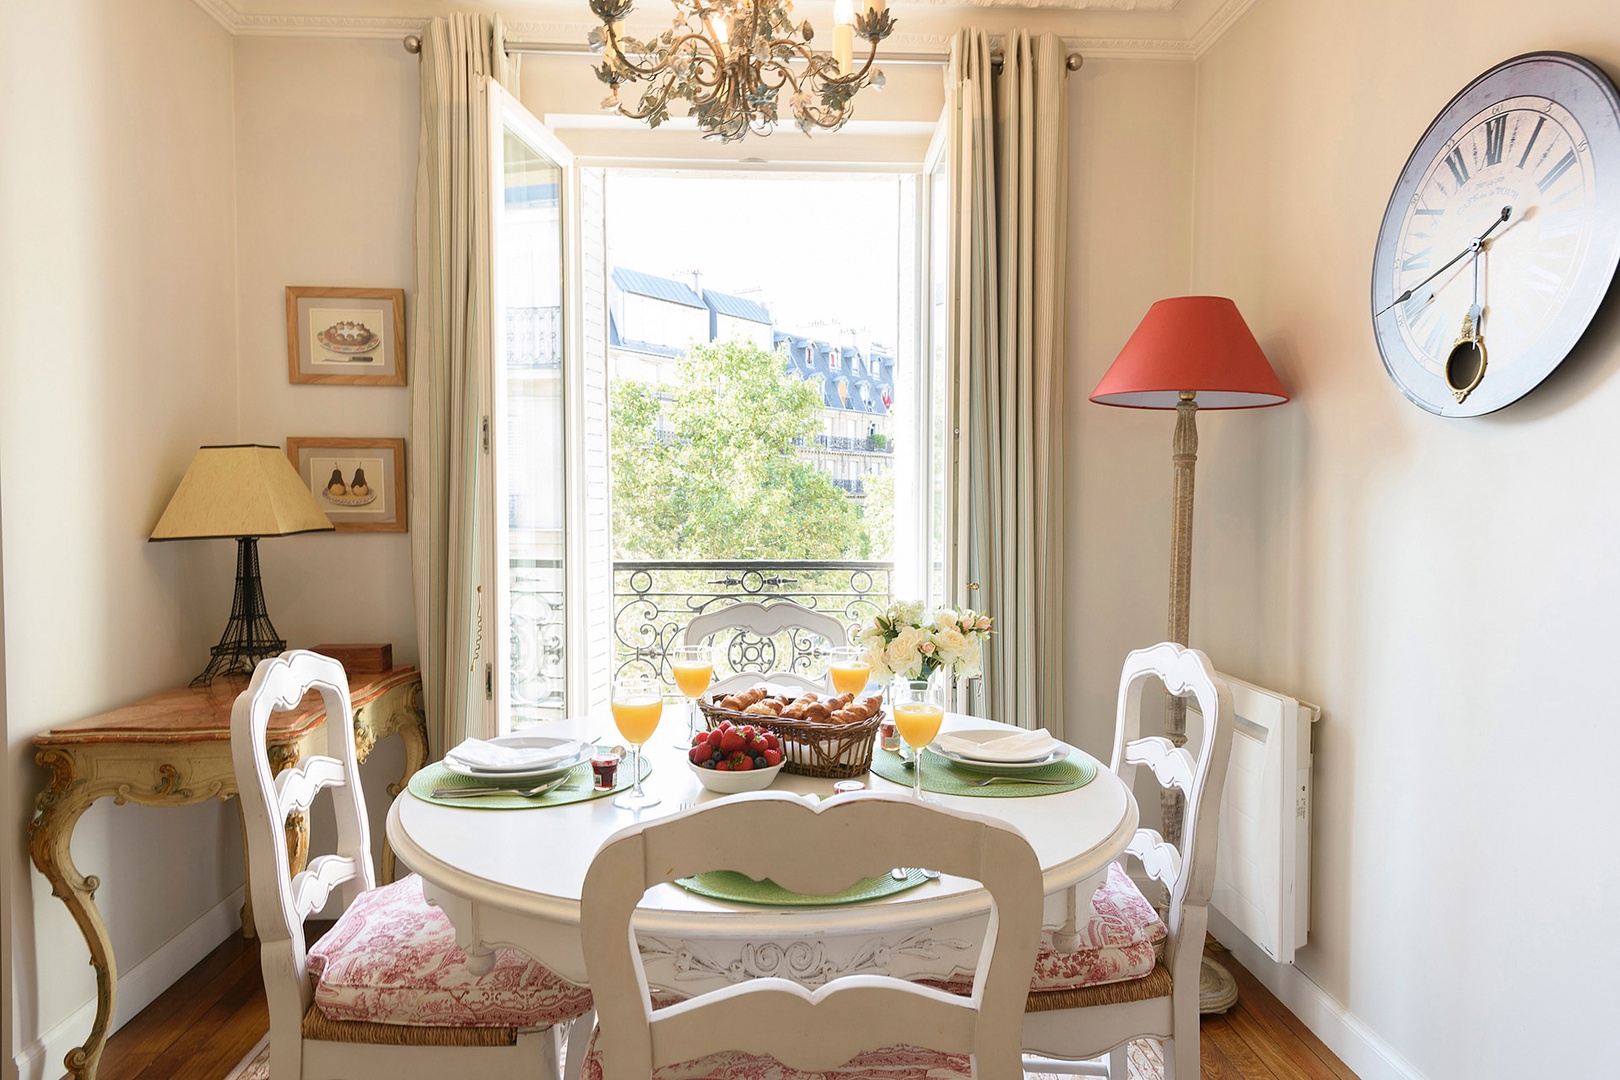 French windows and beautiful views continue in the dining area.